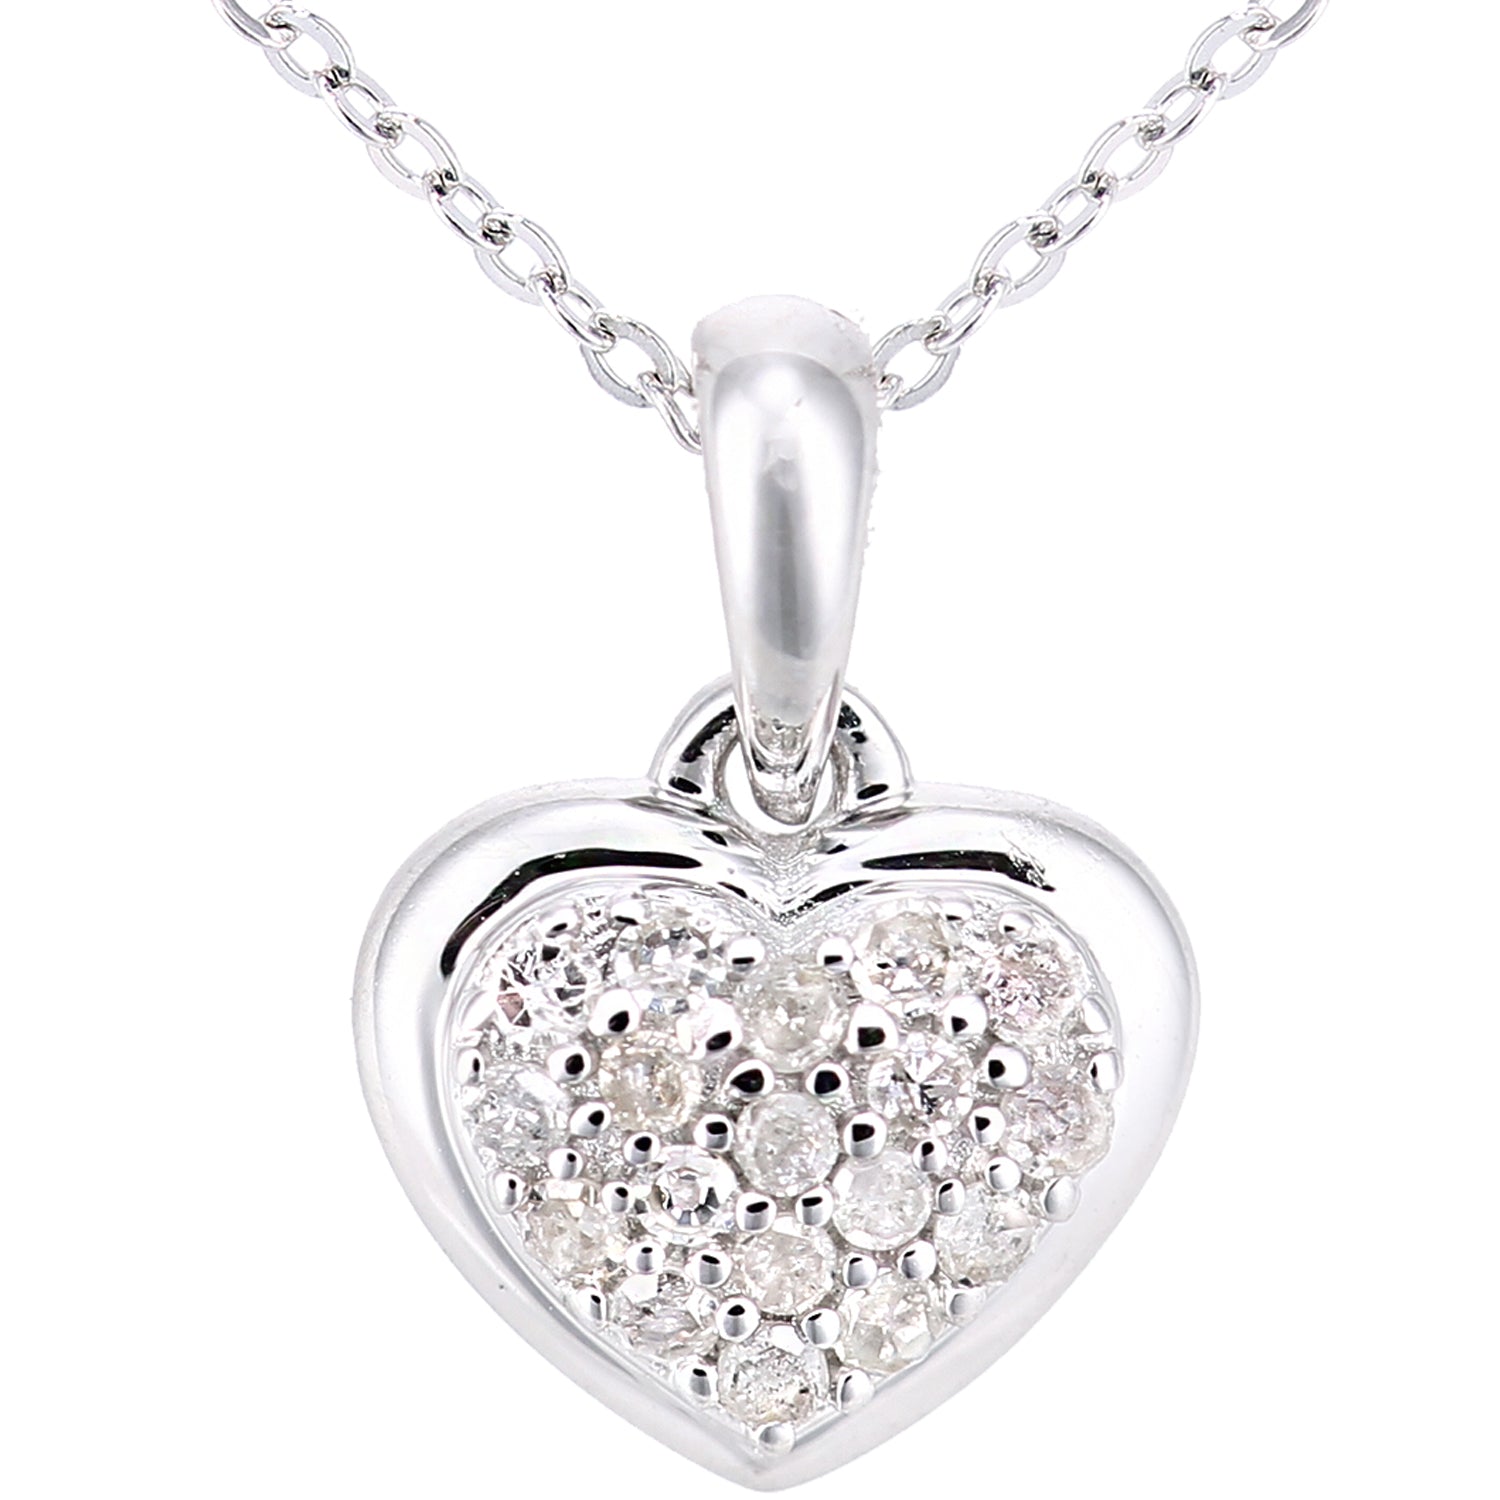 9ct White Gold  Round 10pts Diamond Heart Pendant Necklace 18 inch - PP0AXL5923W